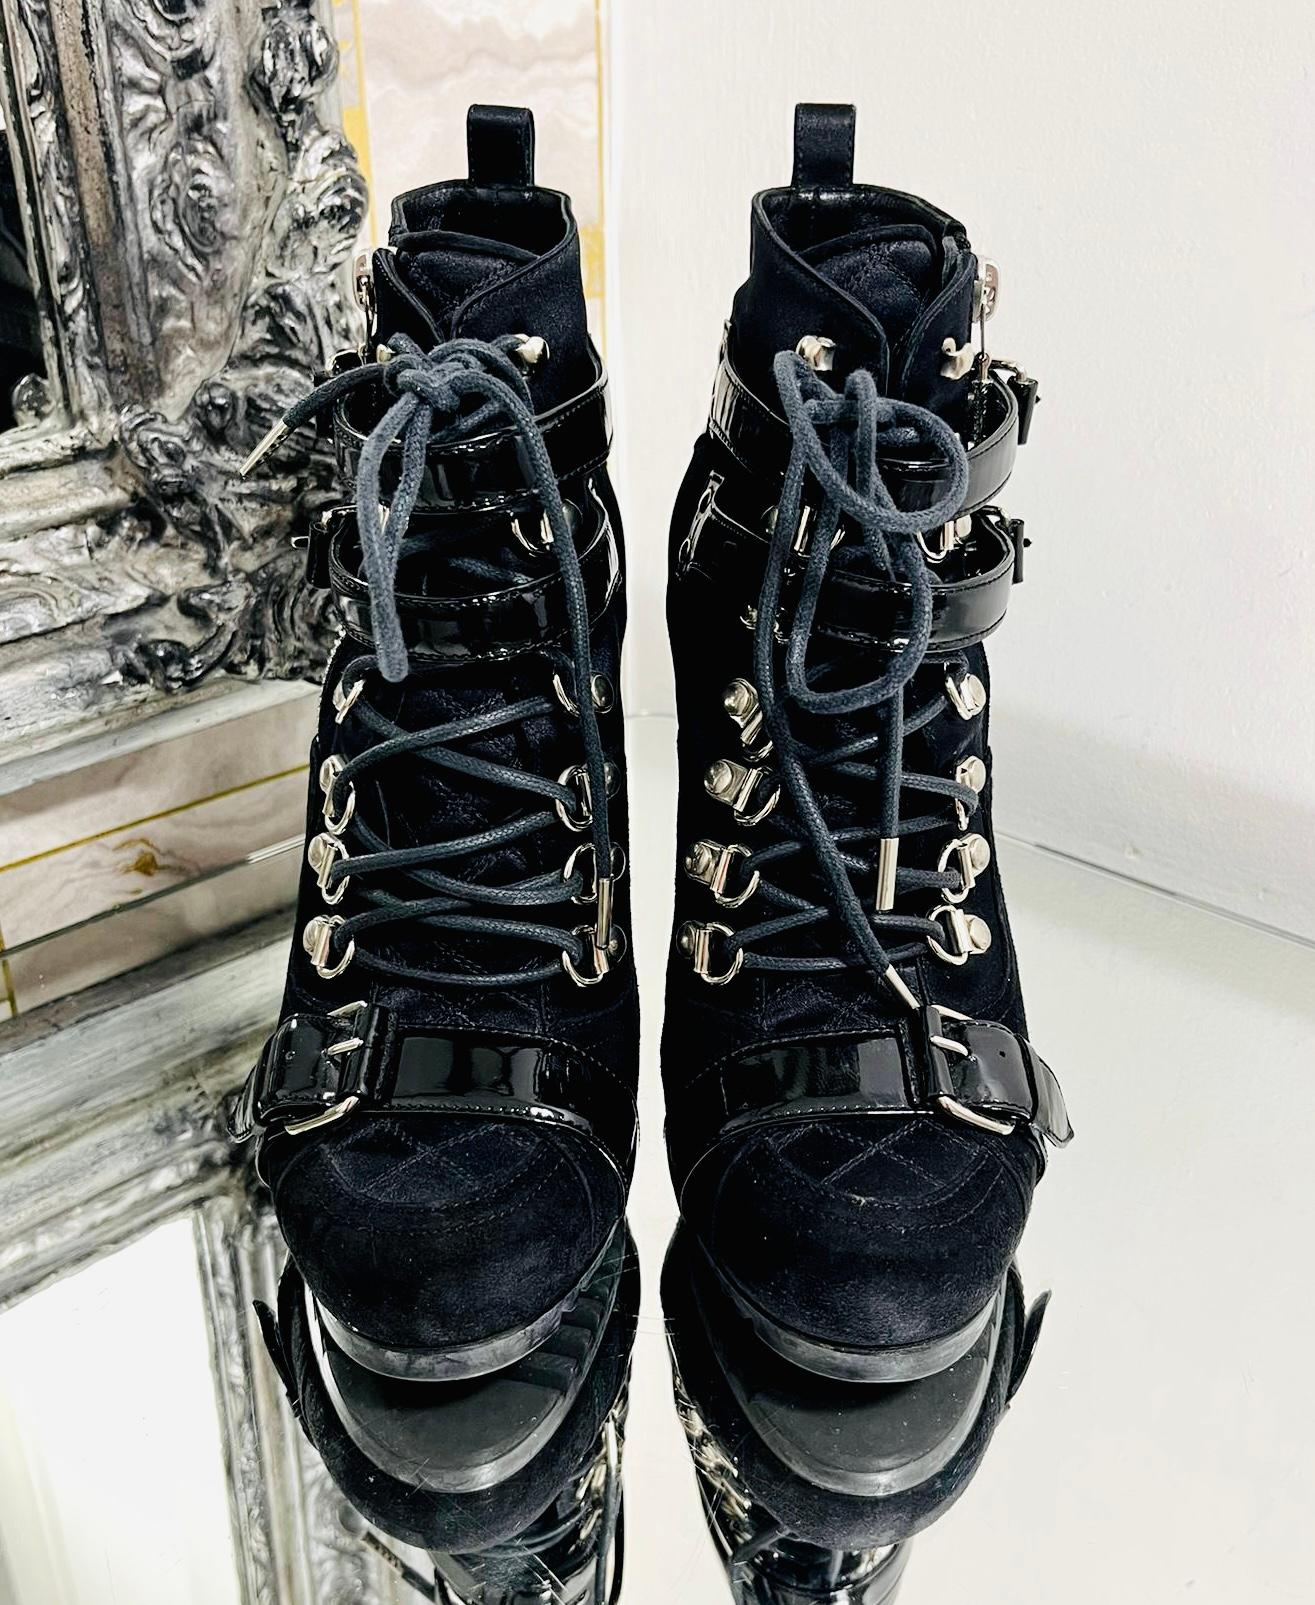 Balenciaga Biker Ankle Shoe/Boots

Black, lace-up boots designed with patent leather buckle detailing.

Featuring round toe and zip fastening to the side.

Satin and suede inserts with high stiletto heel.

Size – 37

Condition – Very